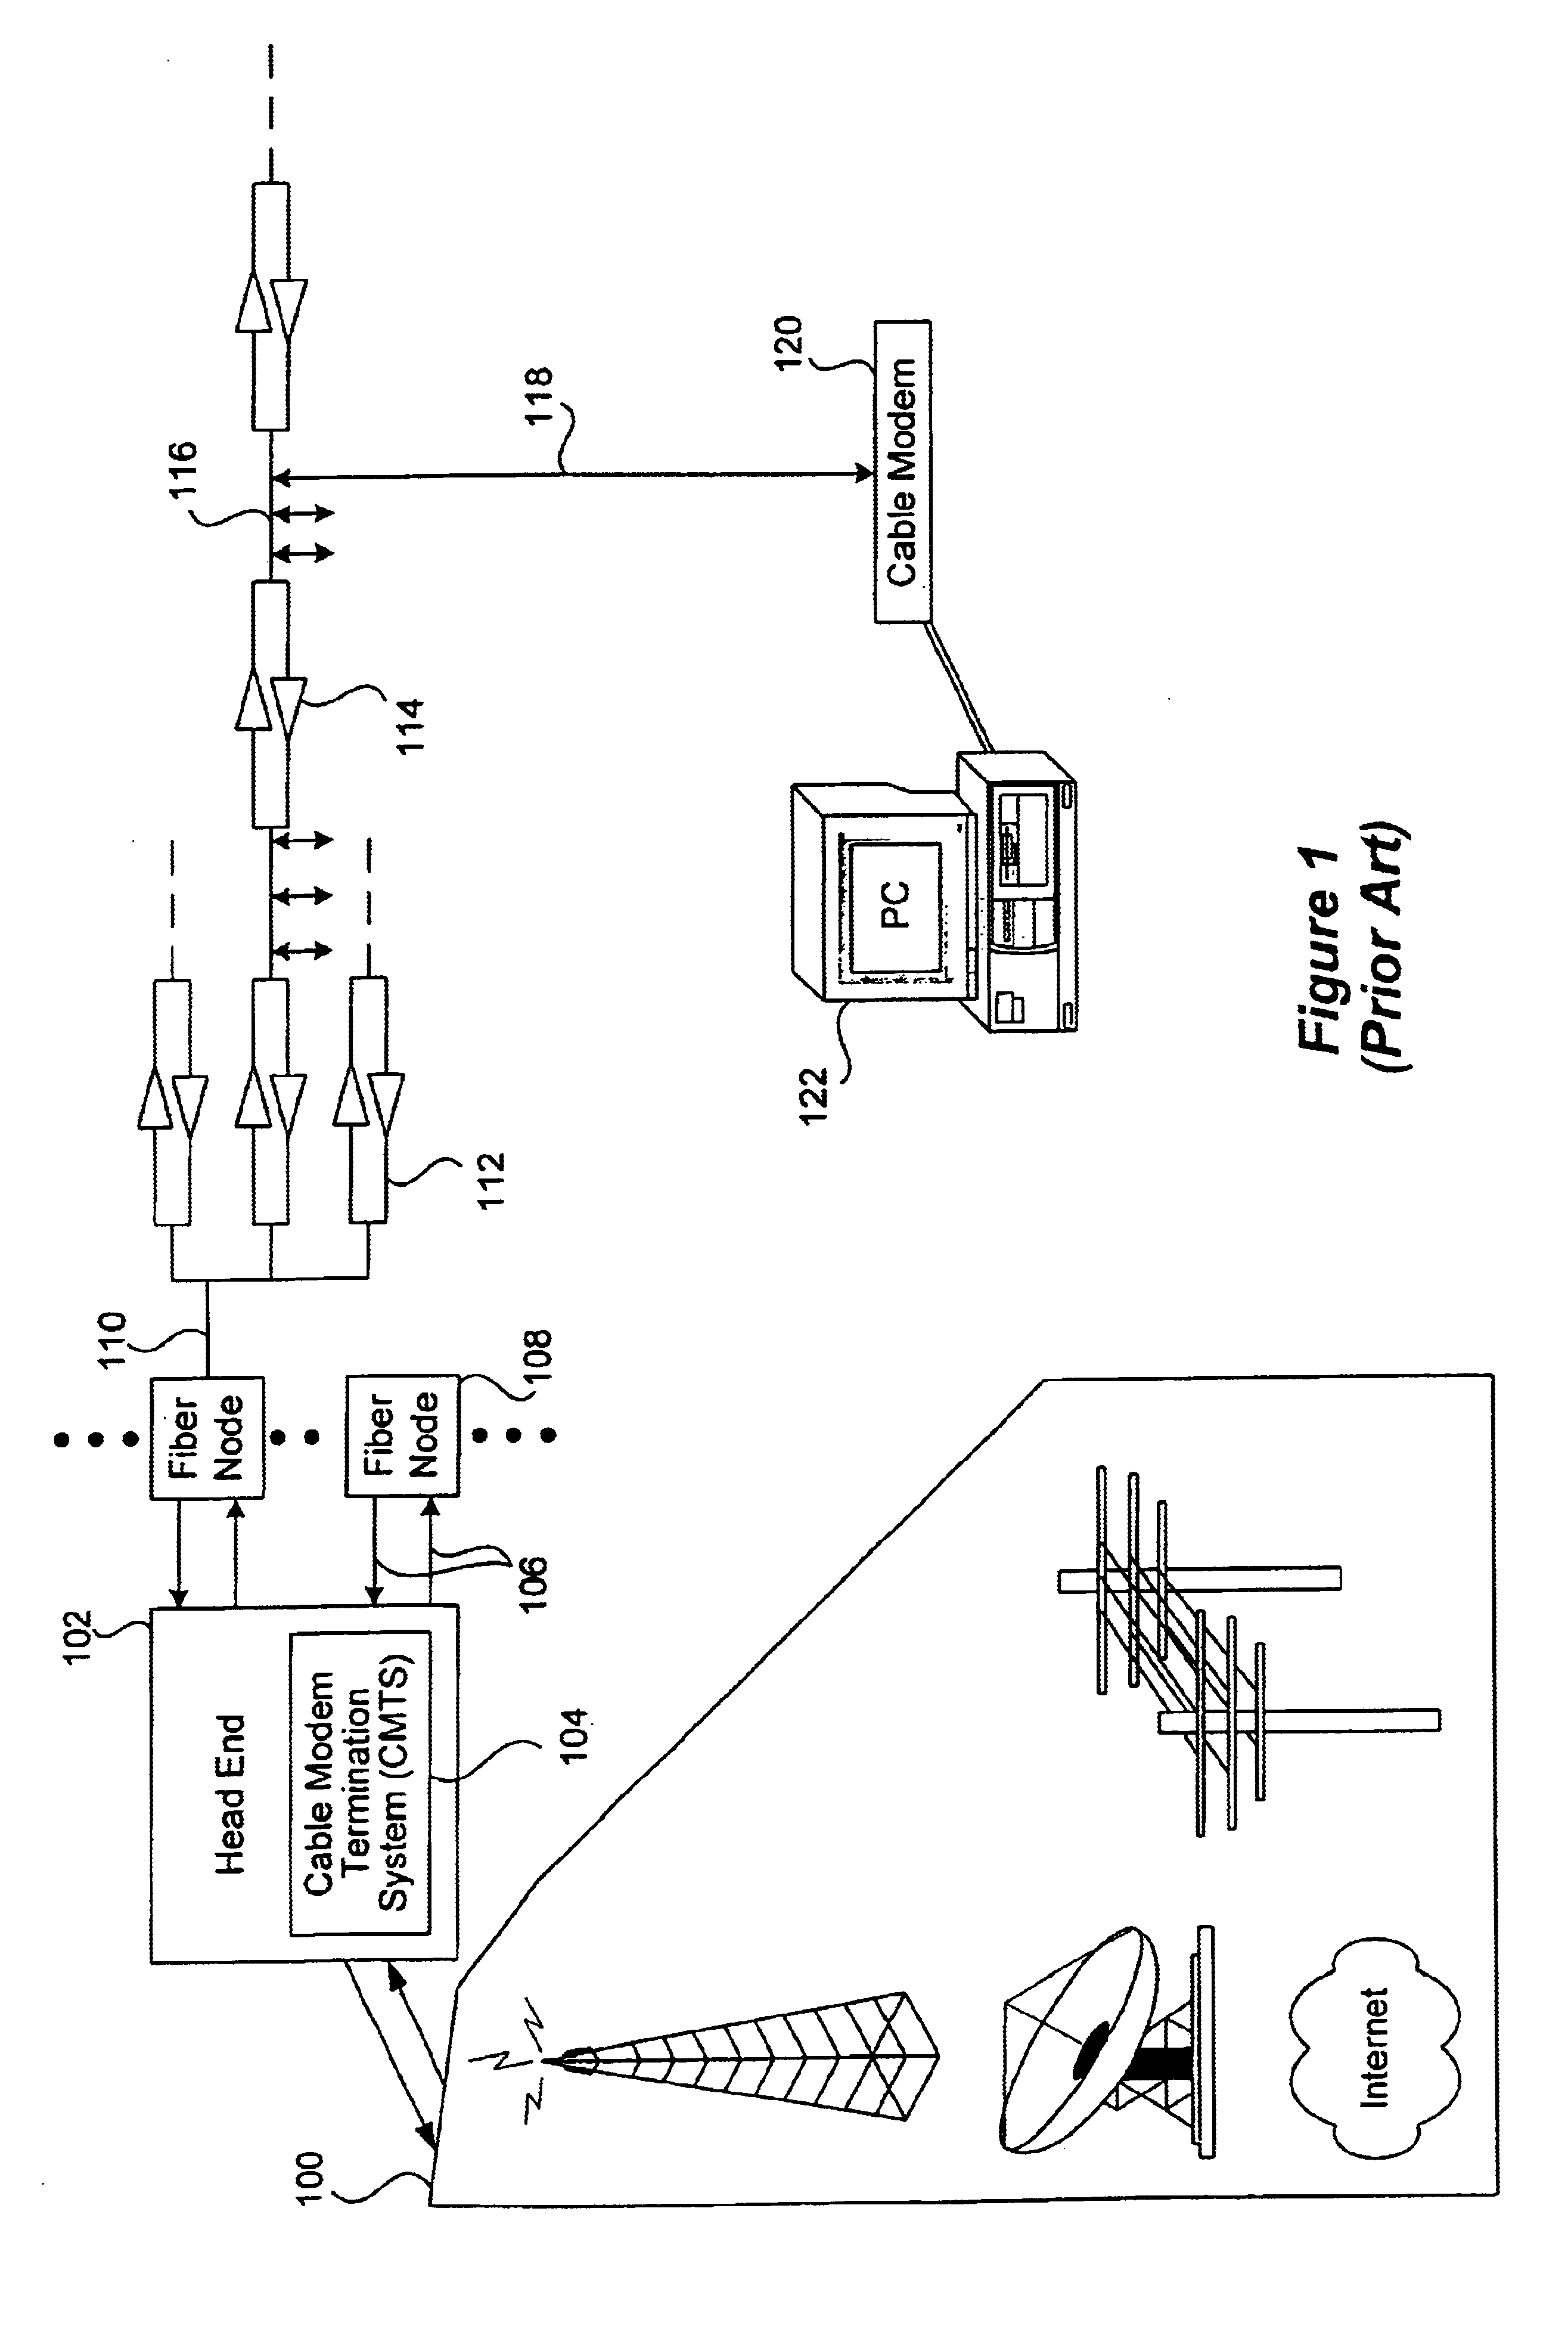 Method and apparatus for reducing noise leakage from a cable modem